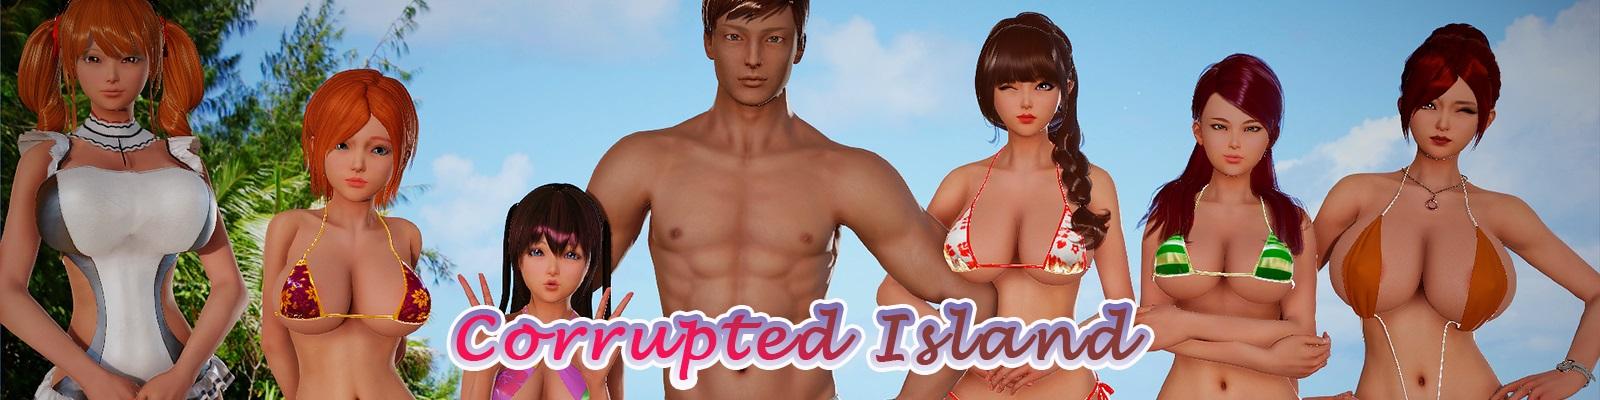 Corrupted Island Version 0.02 by Jon95